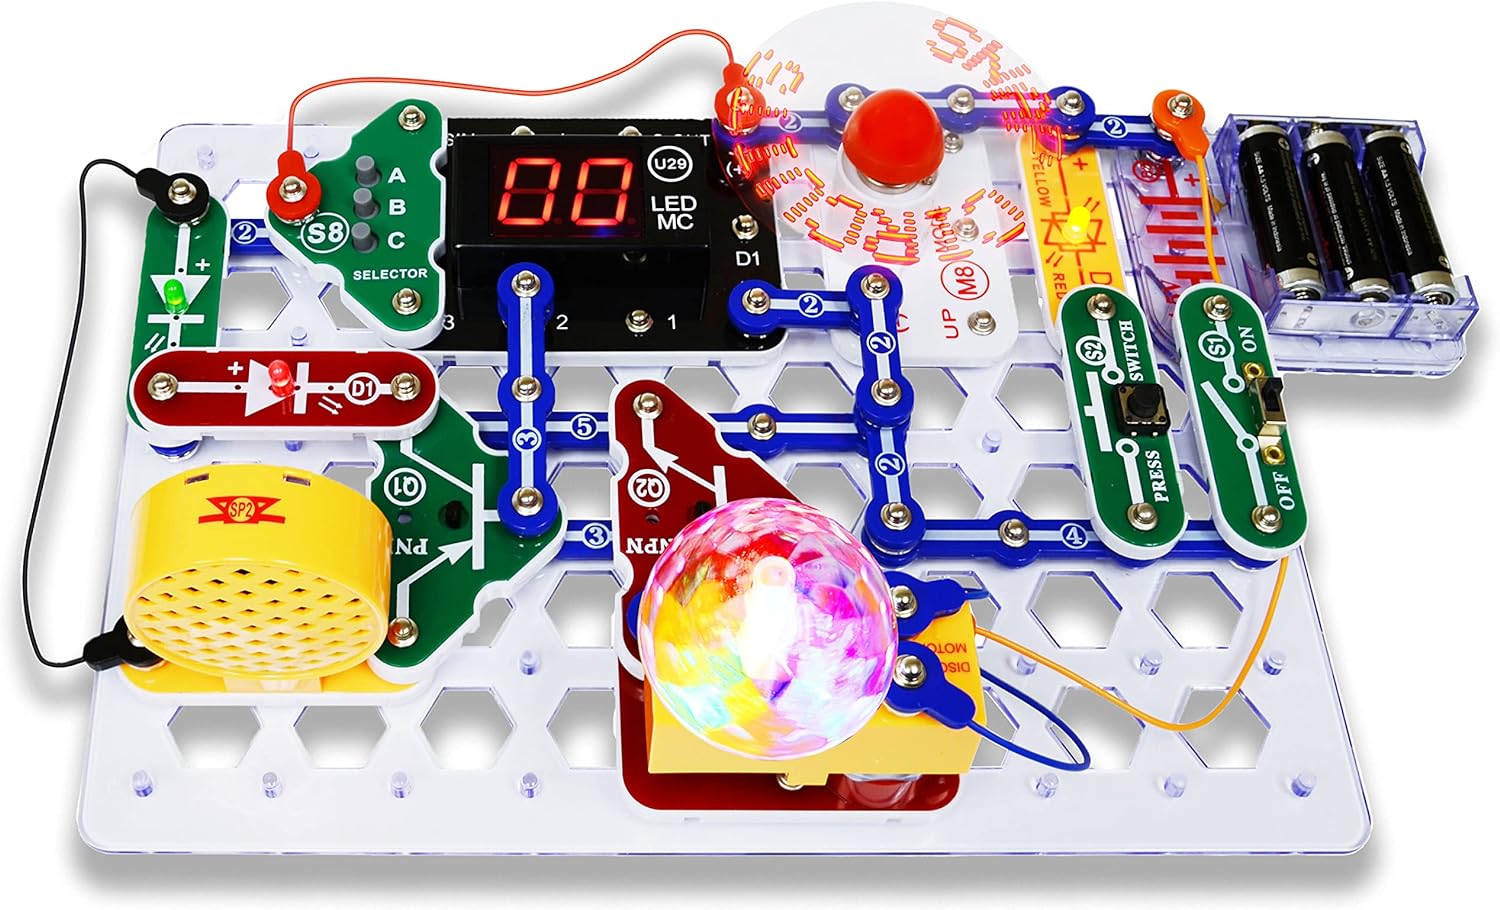 Snap Circuits “Arcade”, Electronics Exploration Kit, Stem Activities for Ages 8+, Full Color Project Manual (SCA-200)